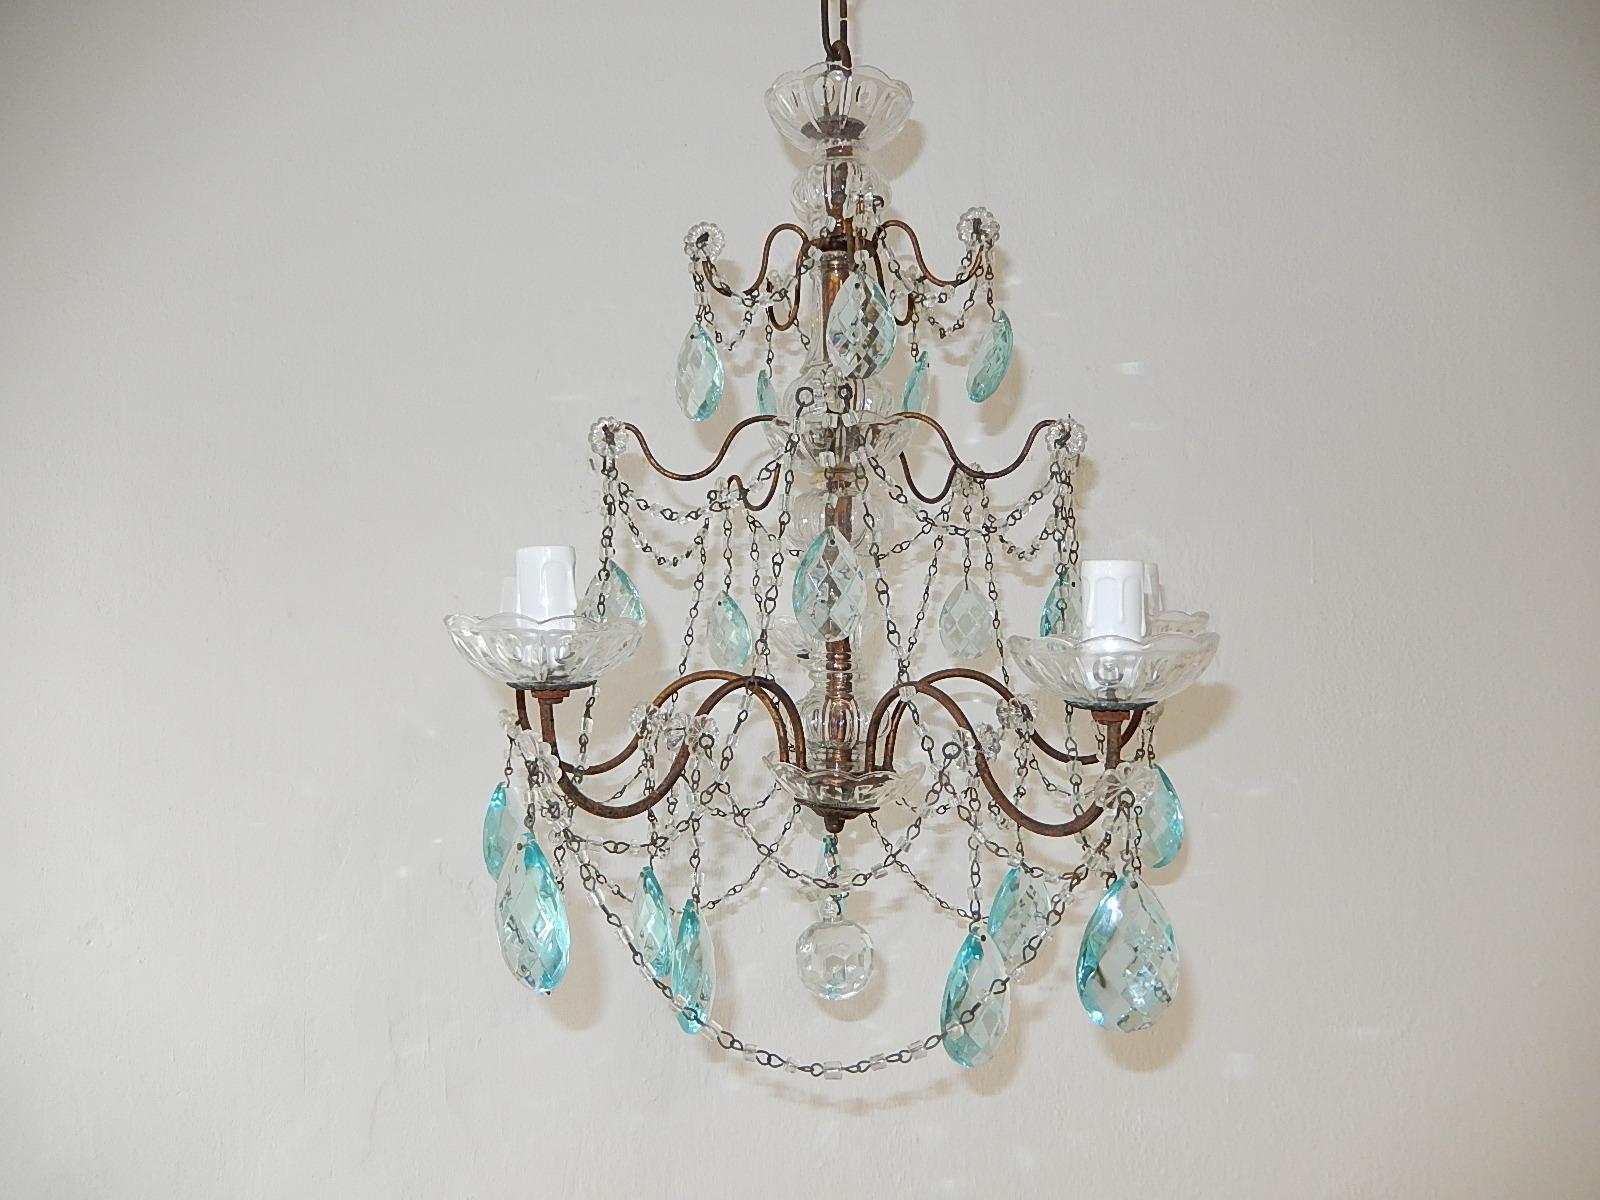 *Rewired and ready to hang! We use certified US UL sockets for the USA as well.  Housing five-light, bobéches in crystal. Swags of small macaroni beads, florets and rare blue Prisms throughout. Murano glass center with crystal bobéches on top and